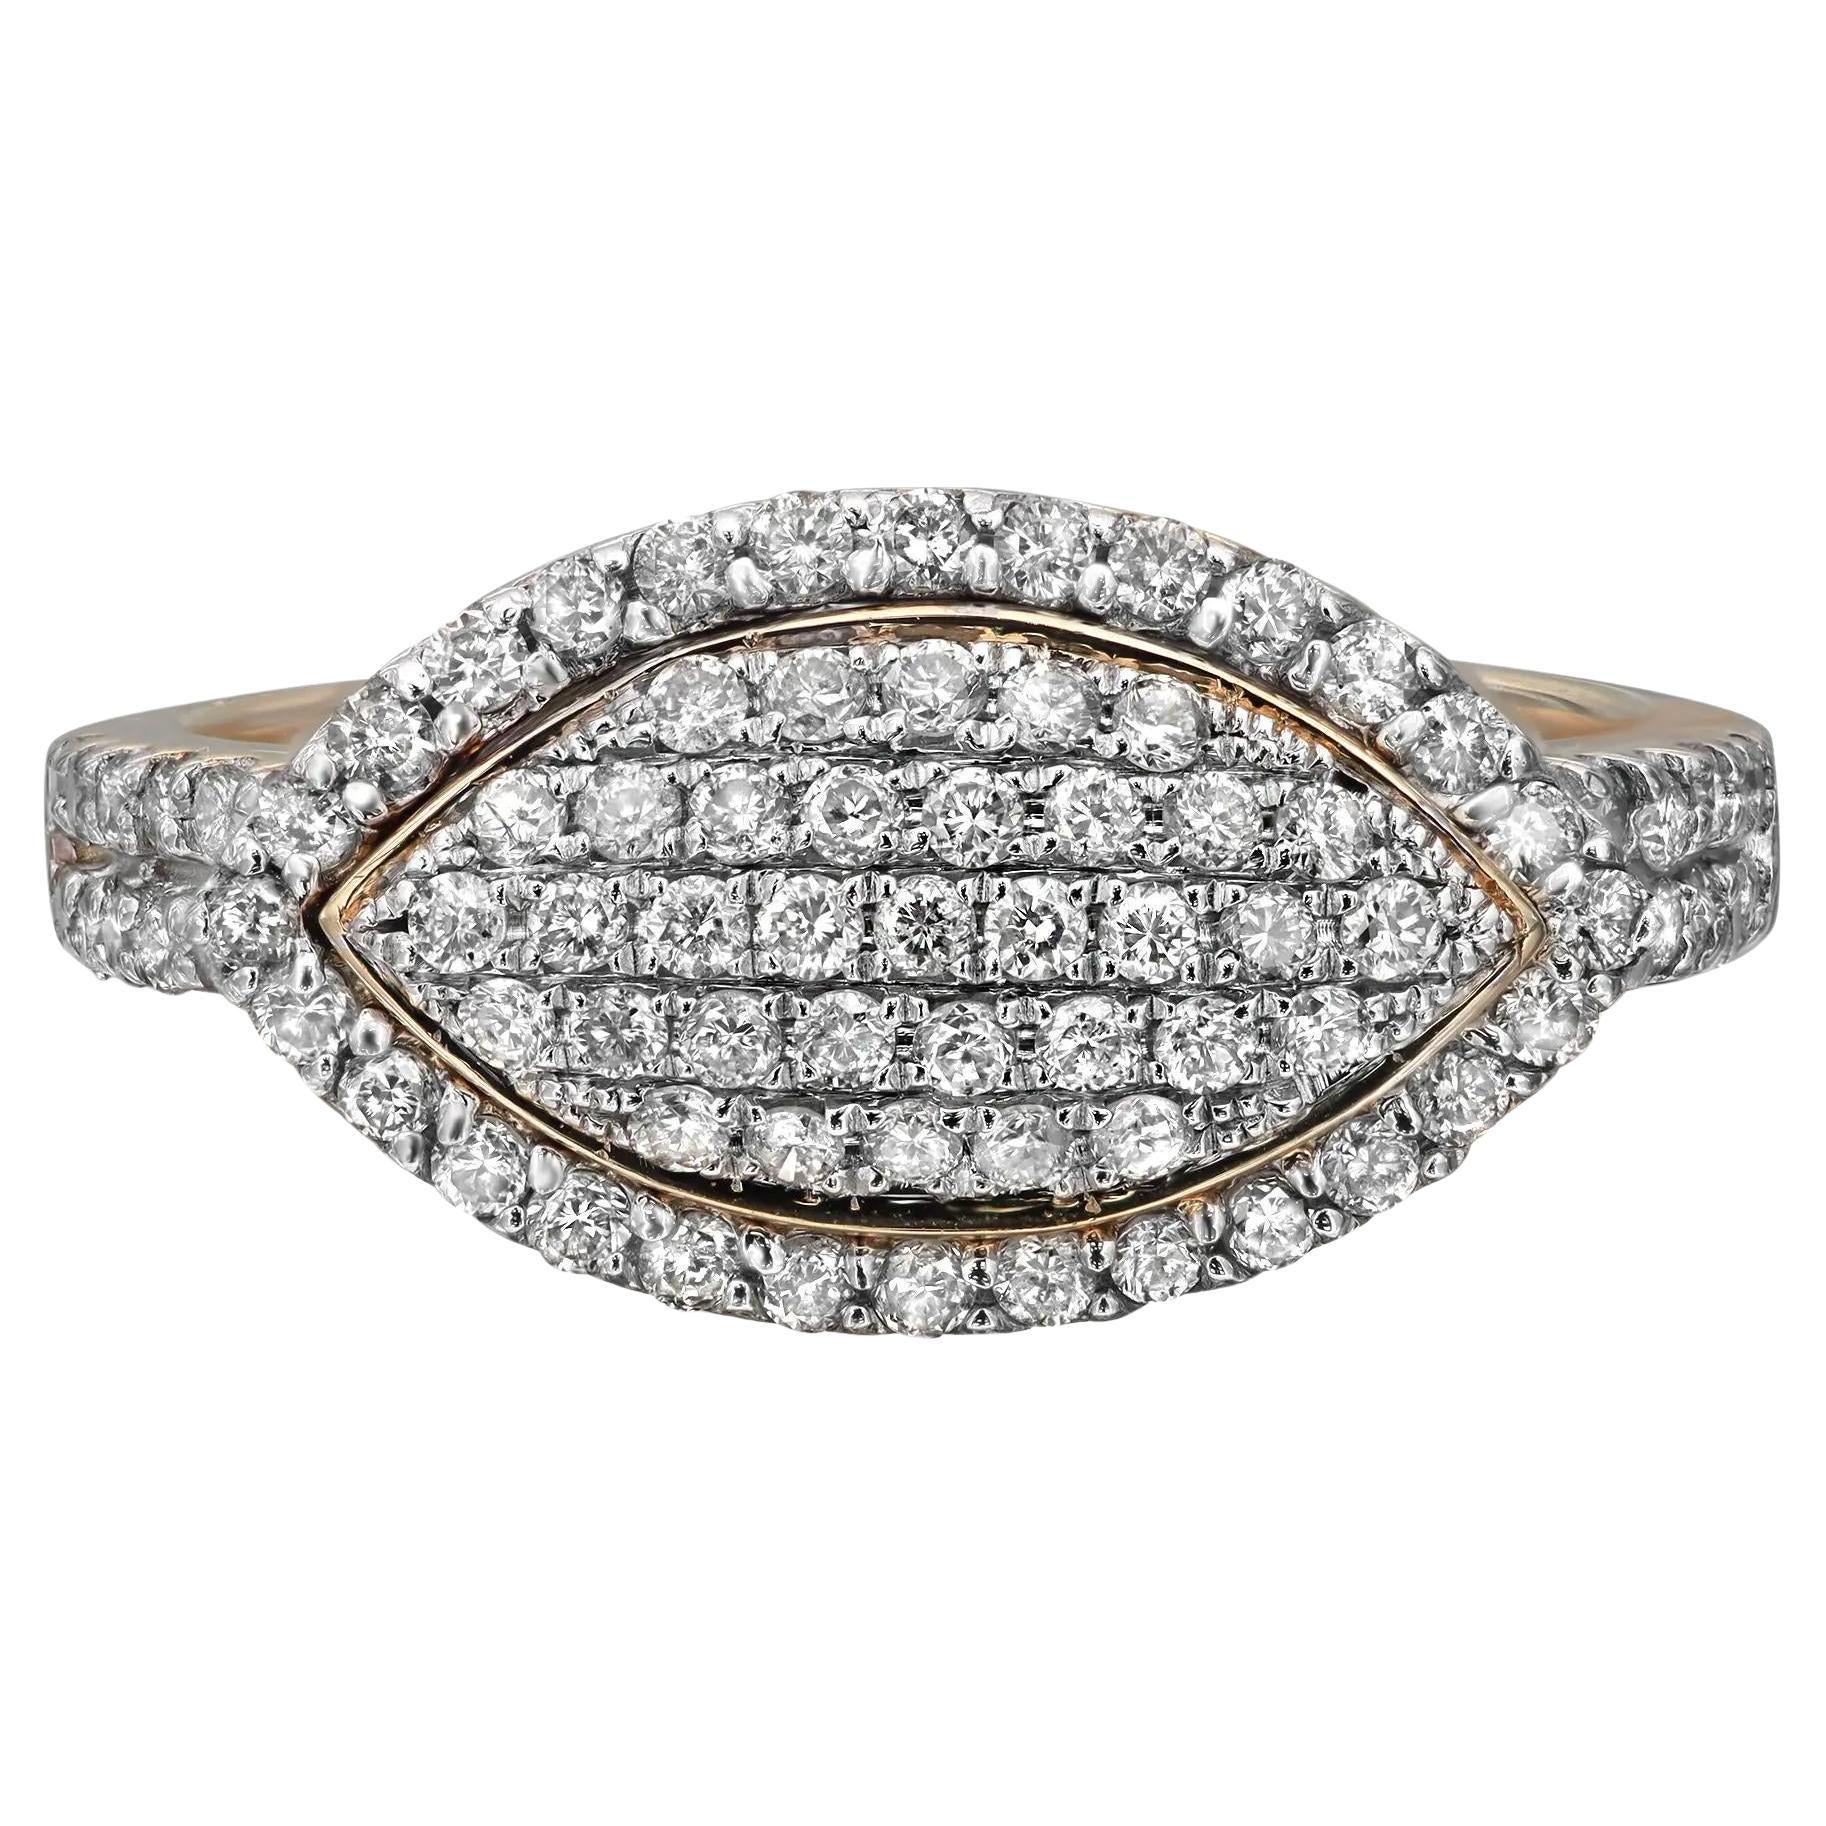 0.72cttw Pave Set Round Diamond Ladies Cocktail Ring 14k Yellow Gold For Sale